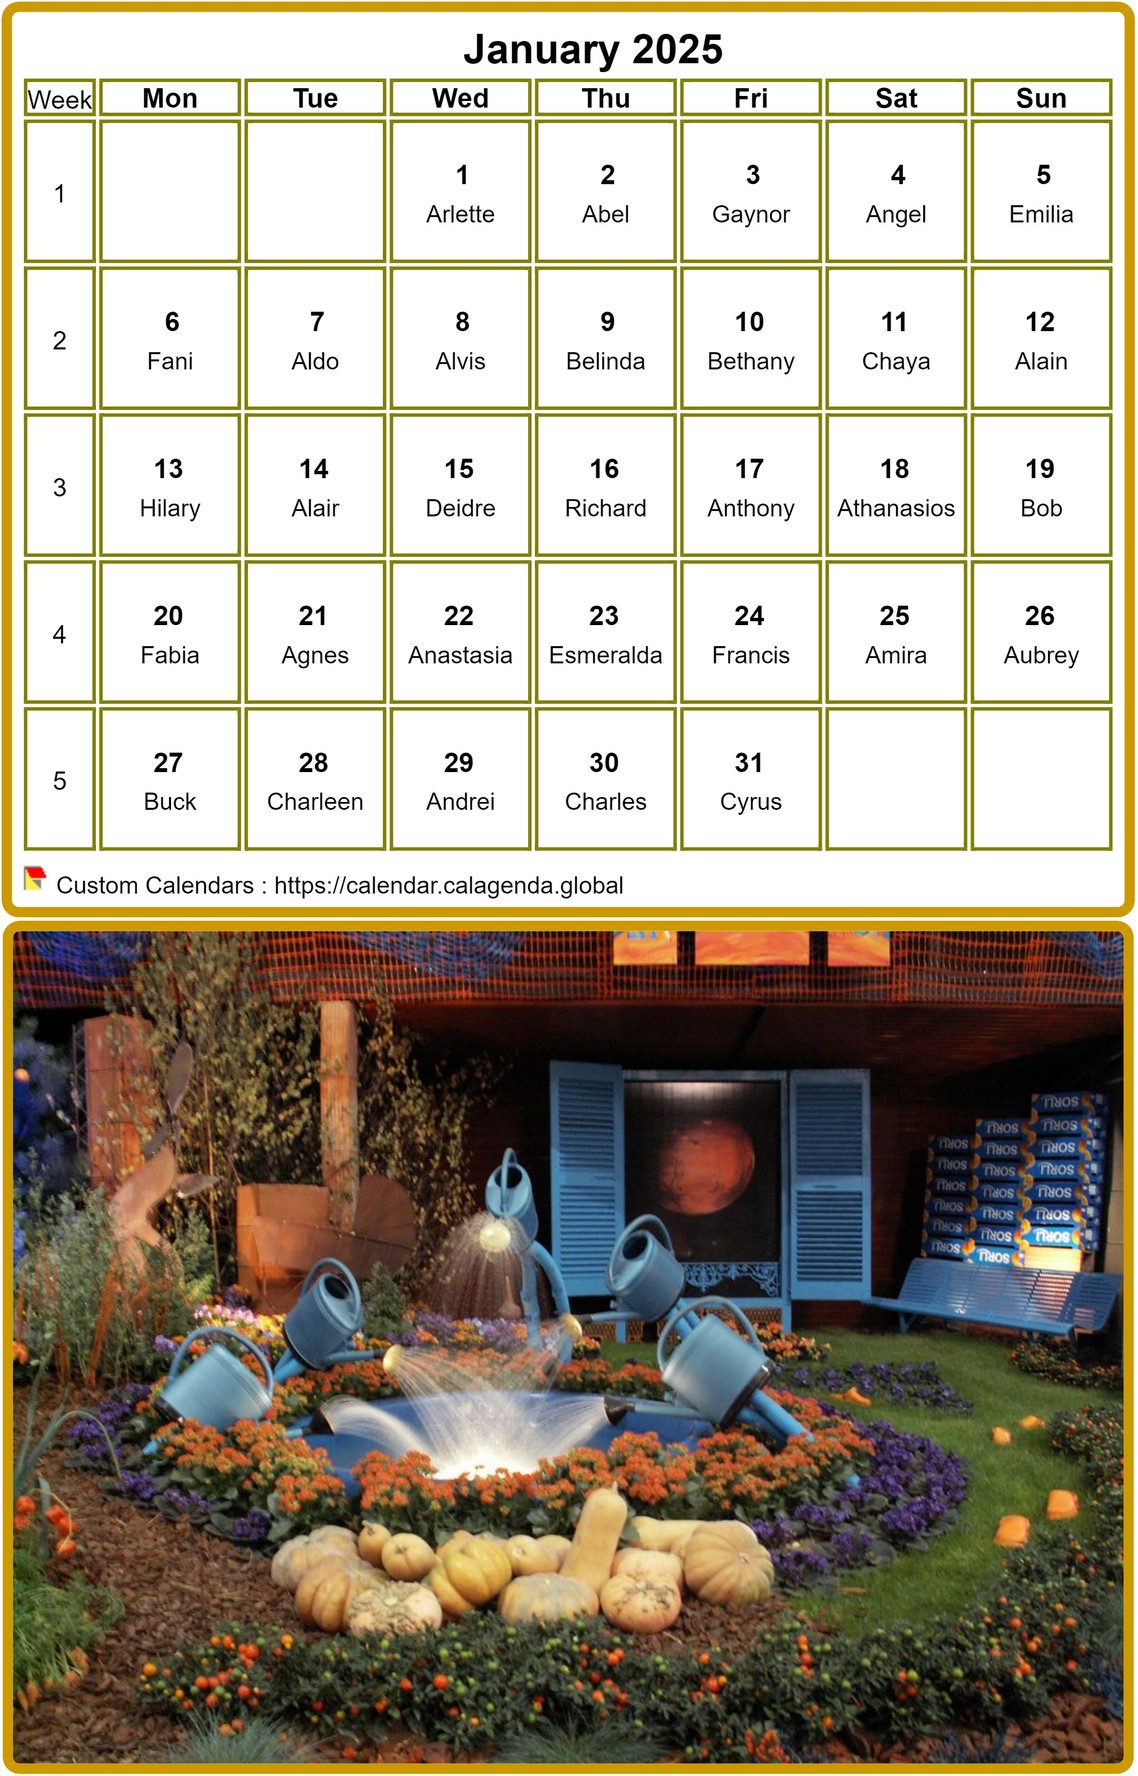 Calendar monthly 2025 to print, with photograph in underside